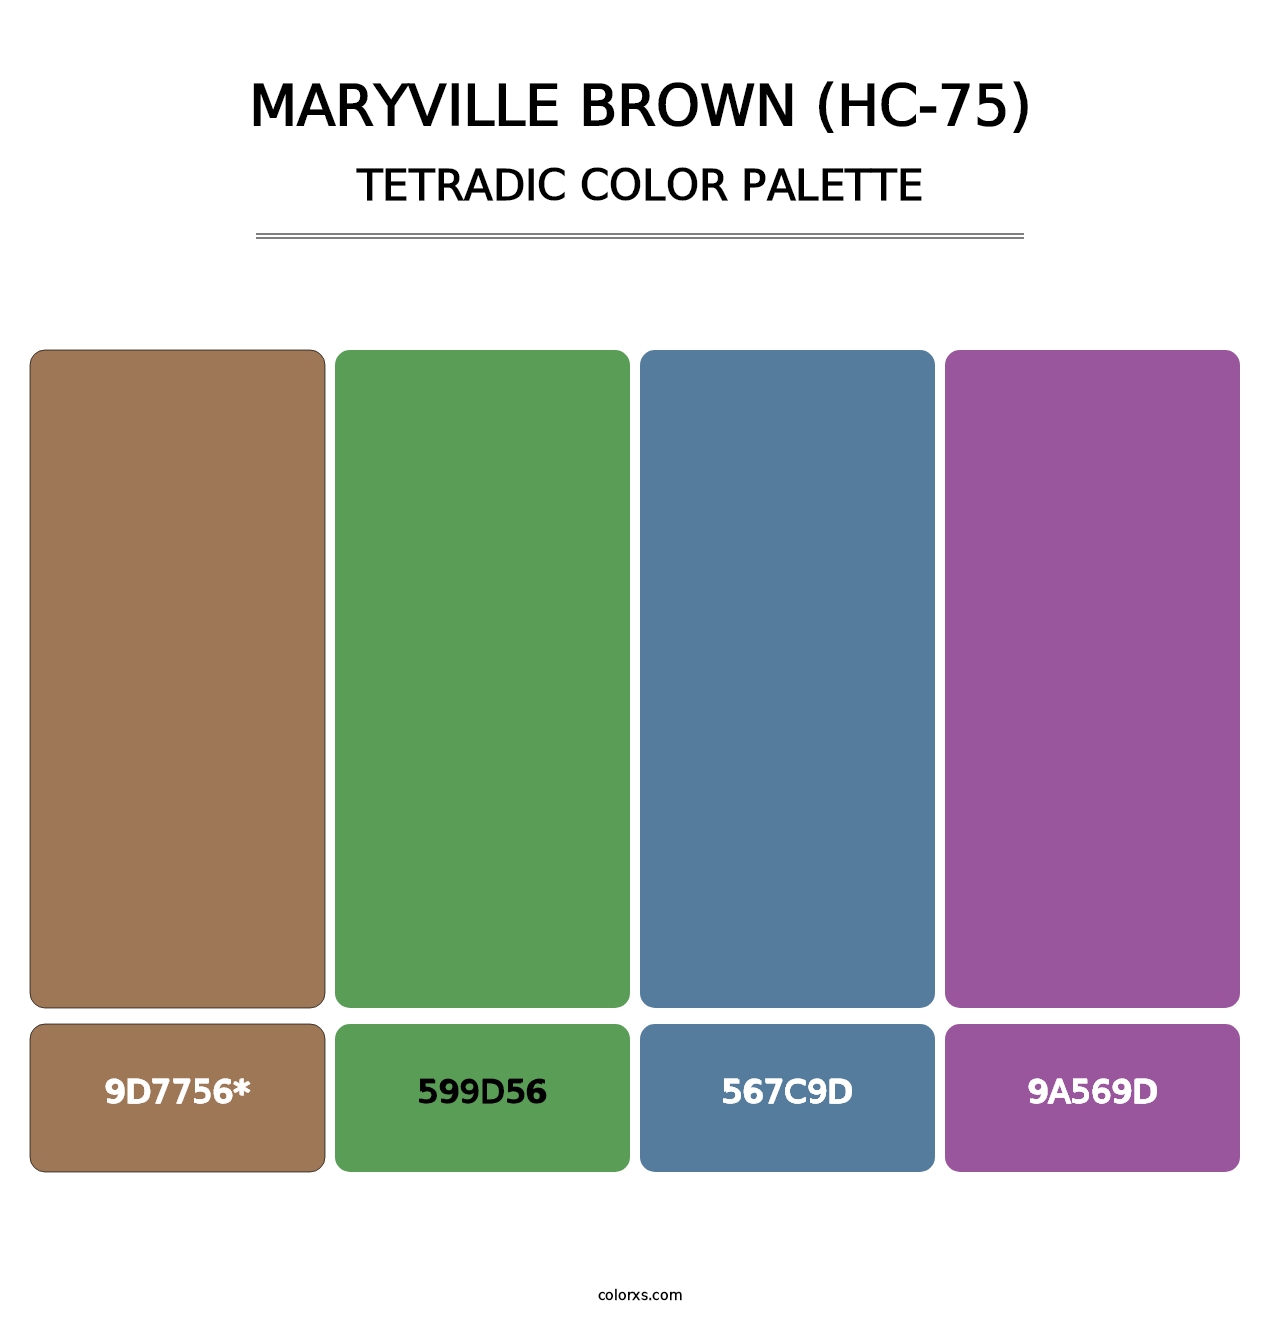 Maryville Brown (HC-75) - Tetradic Color Palette